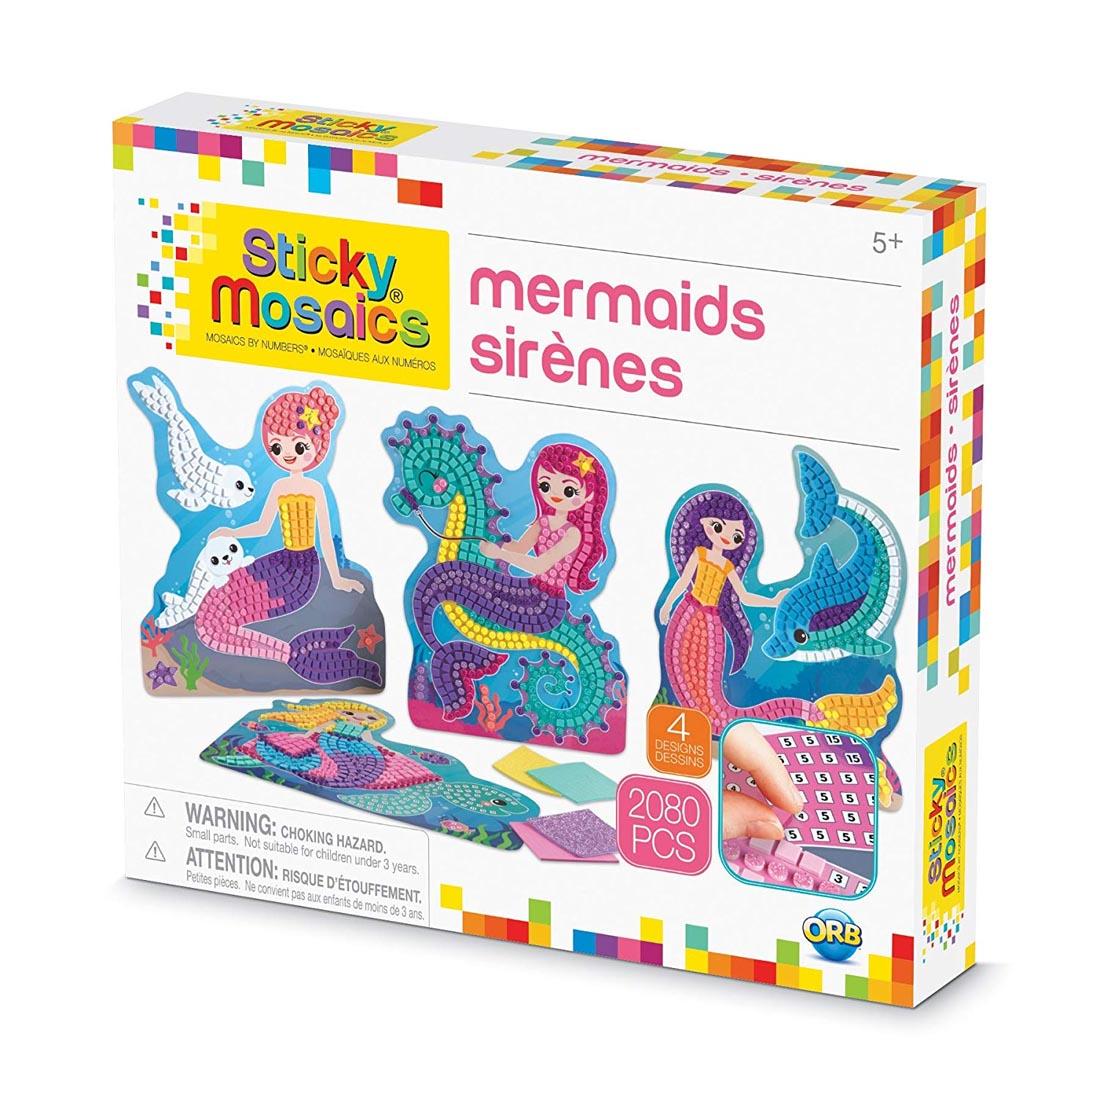 box of adhesive-backed foam mosaic crafts, featuring 4 different mermaid designs